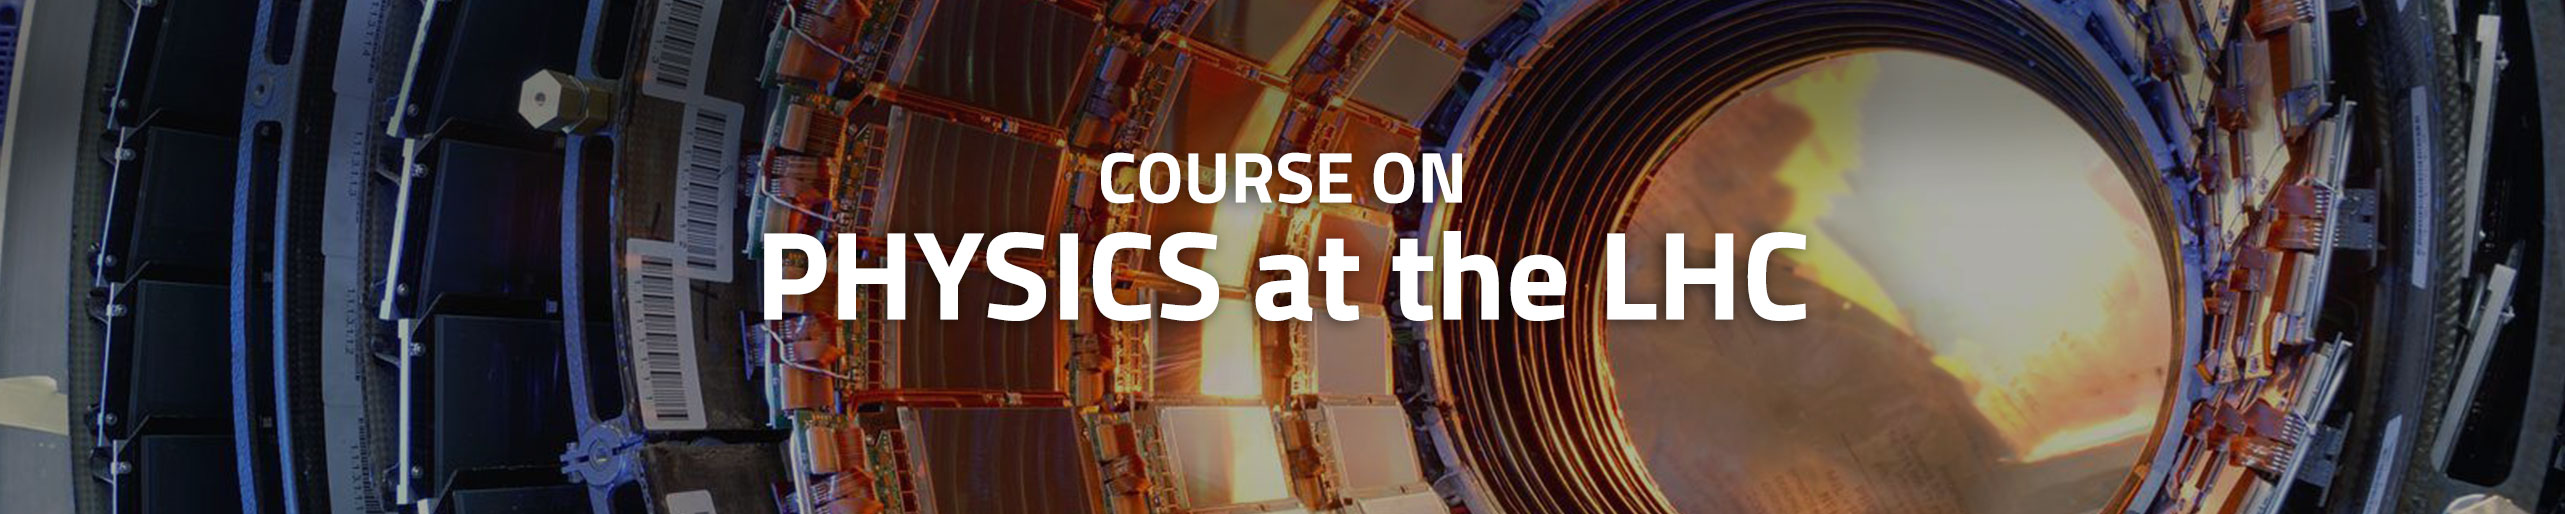 Course on Physics at the LHC 2022